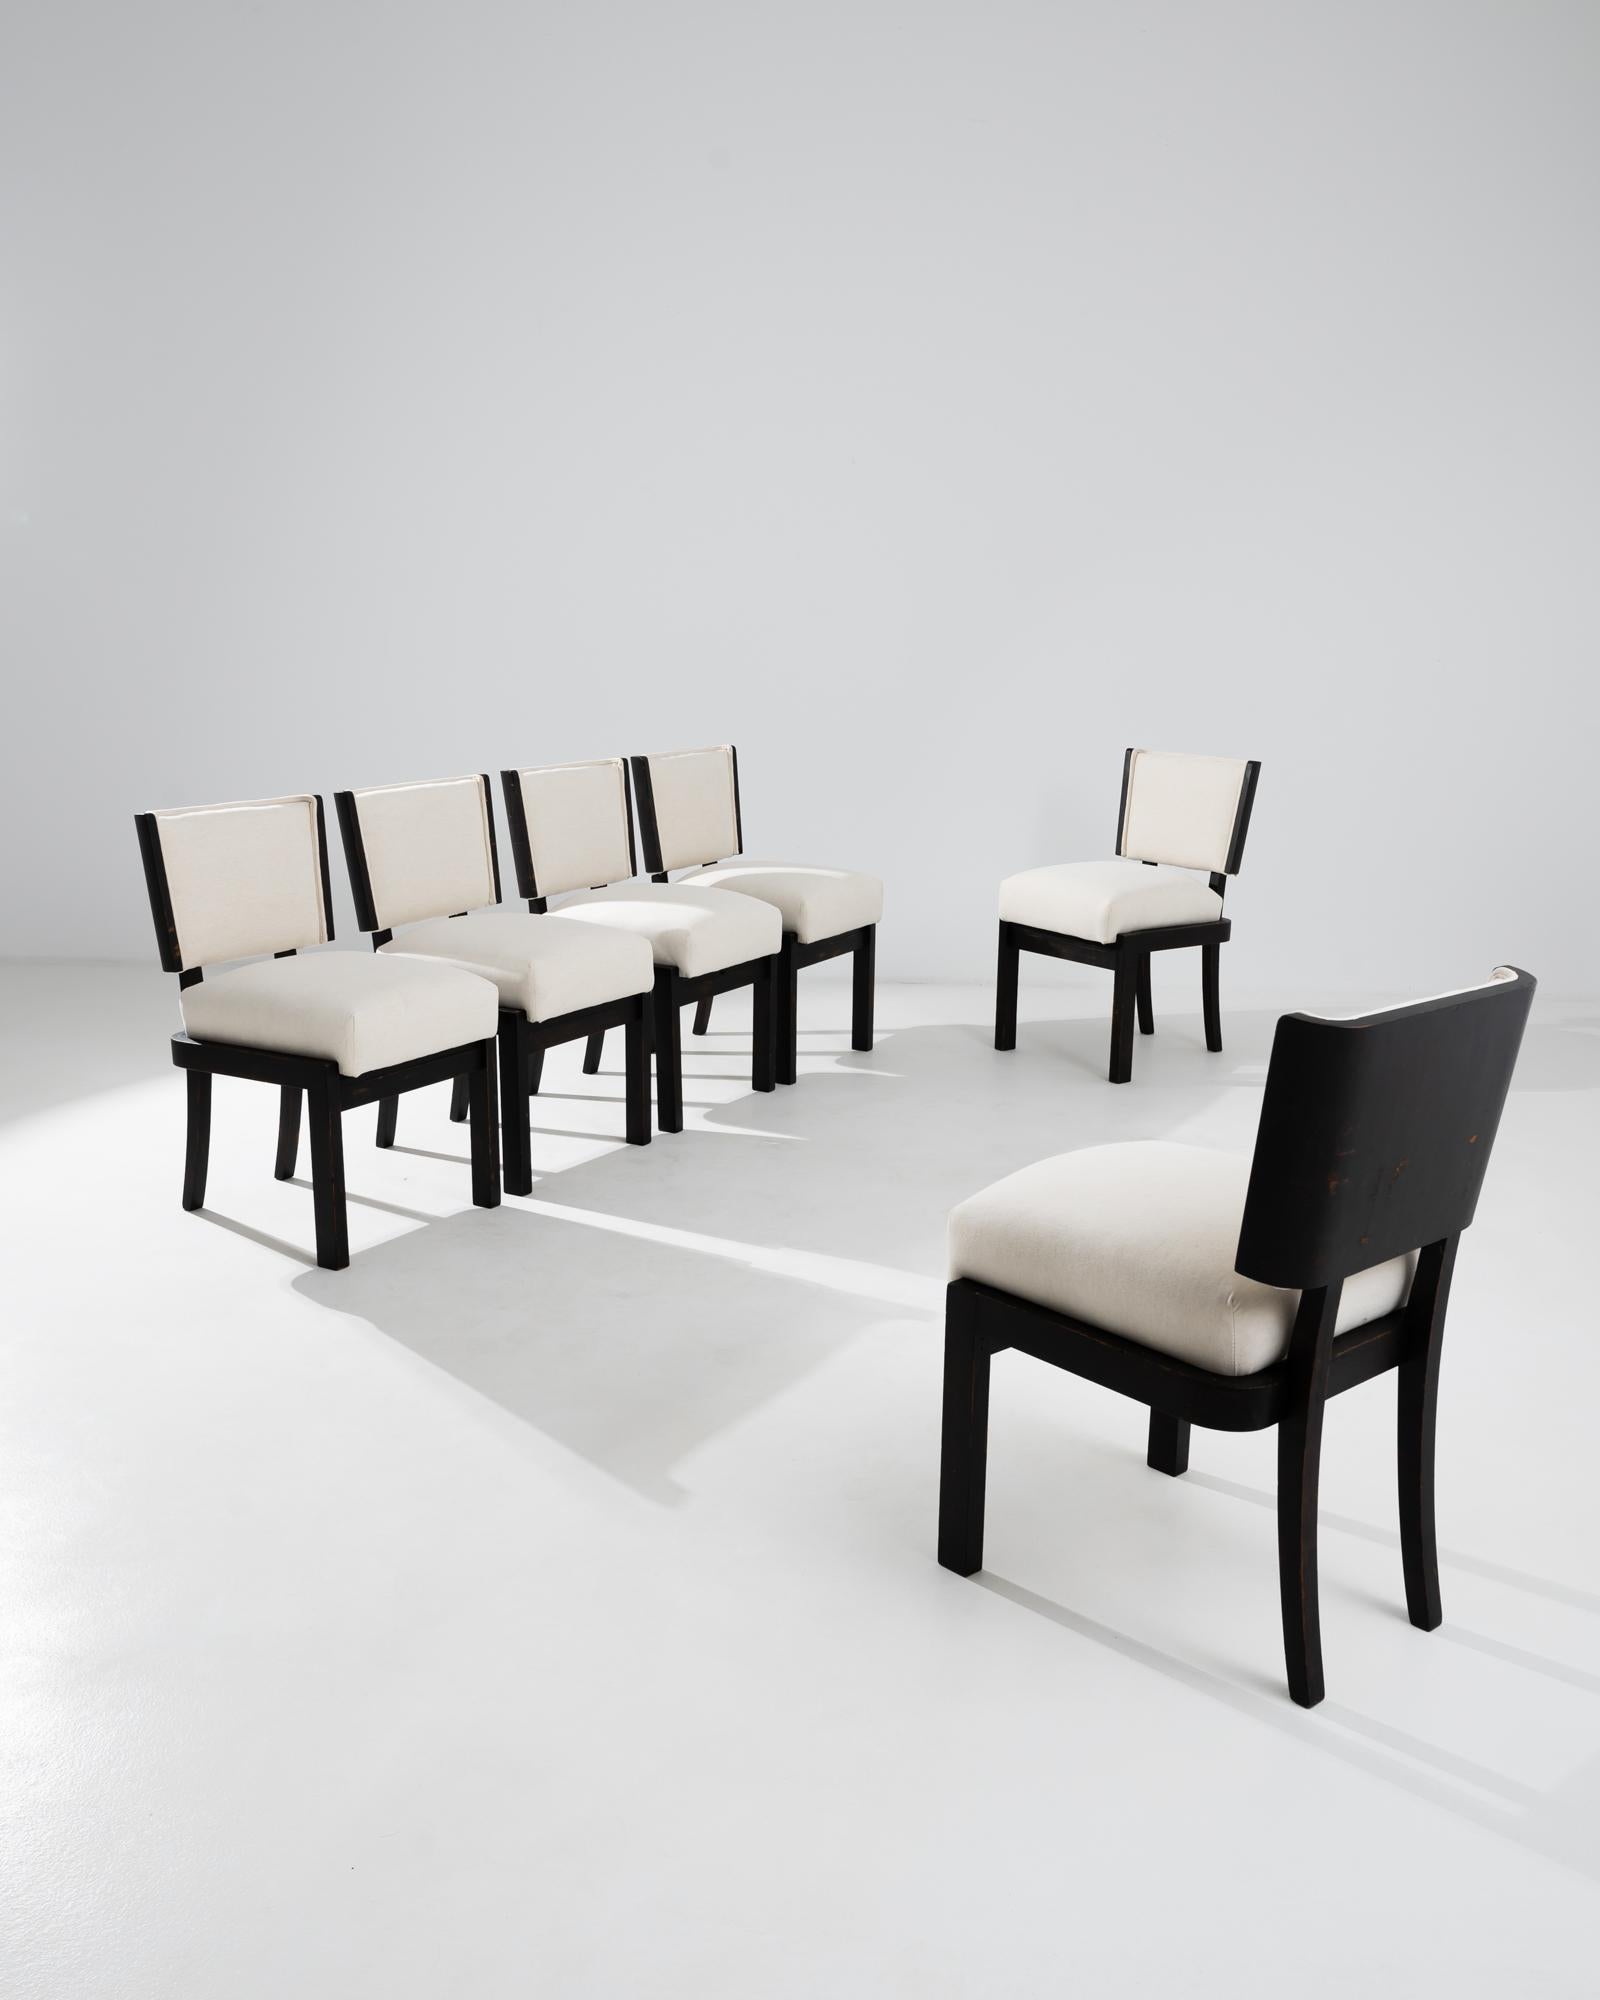 A set of wooden upholstered dining chairs from 1930s Czechia. This early 1930s set of chairs evokes the sense of geometric design of Central European Modernism, yet displays a rustic sensibility in its construction. A light patina runs the length of